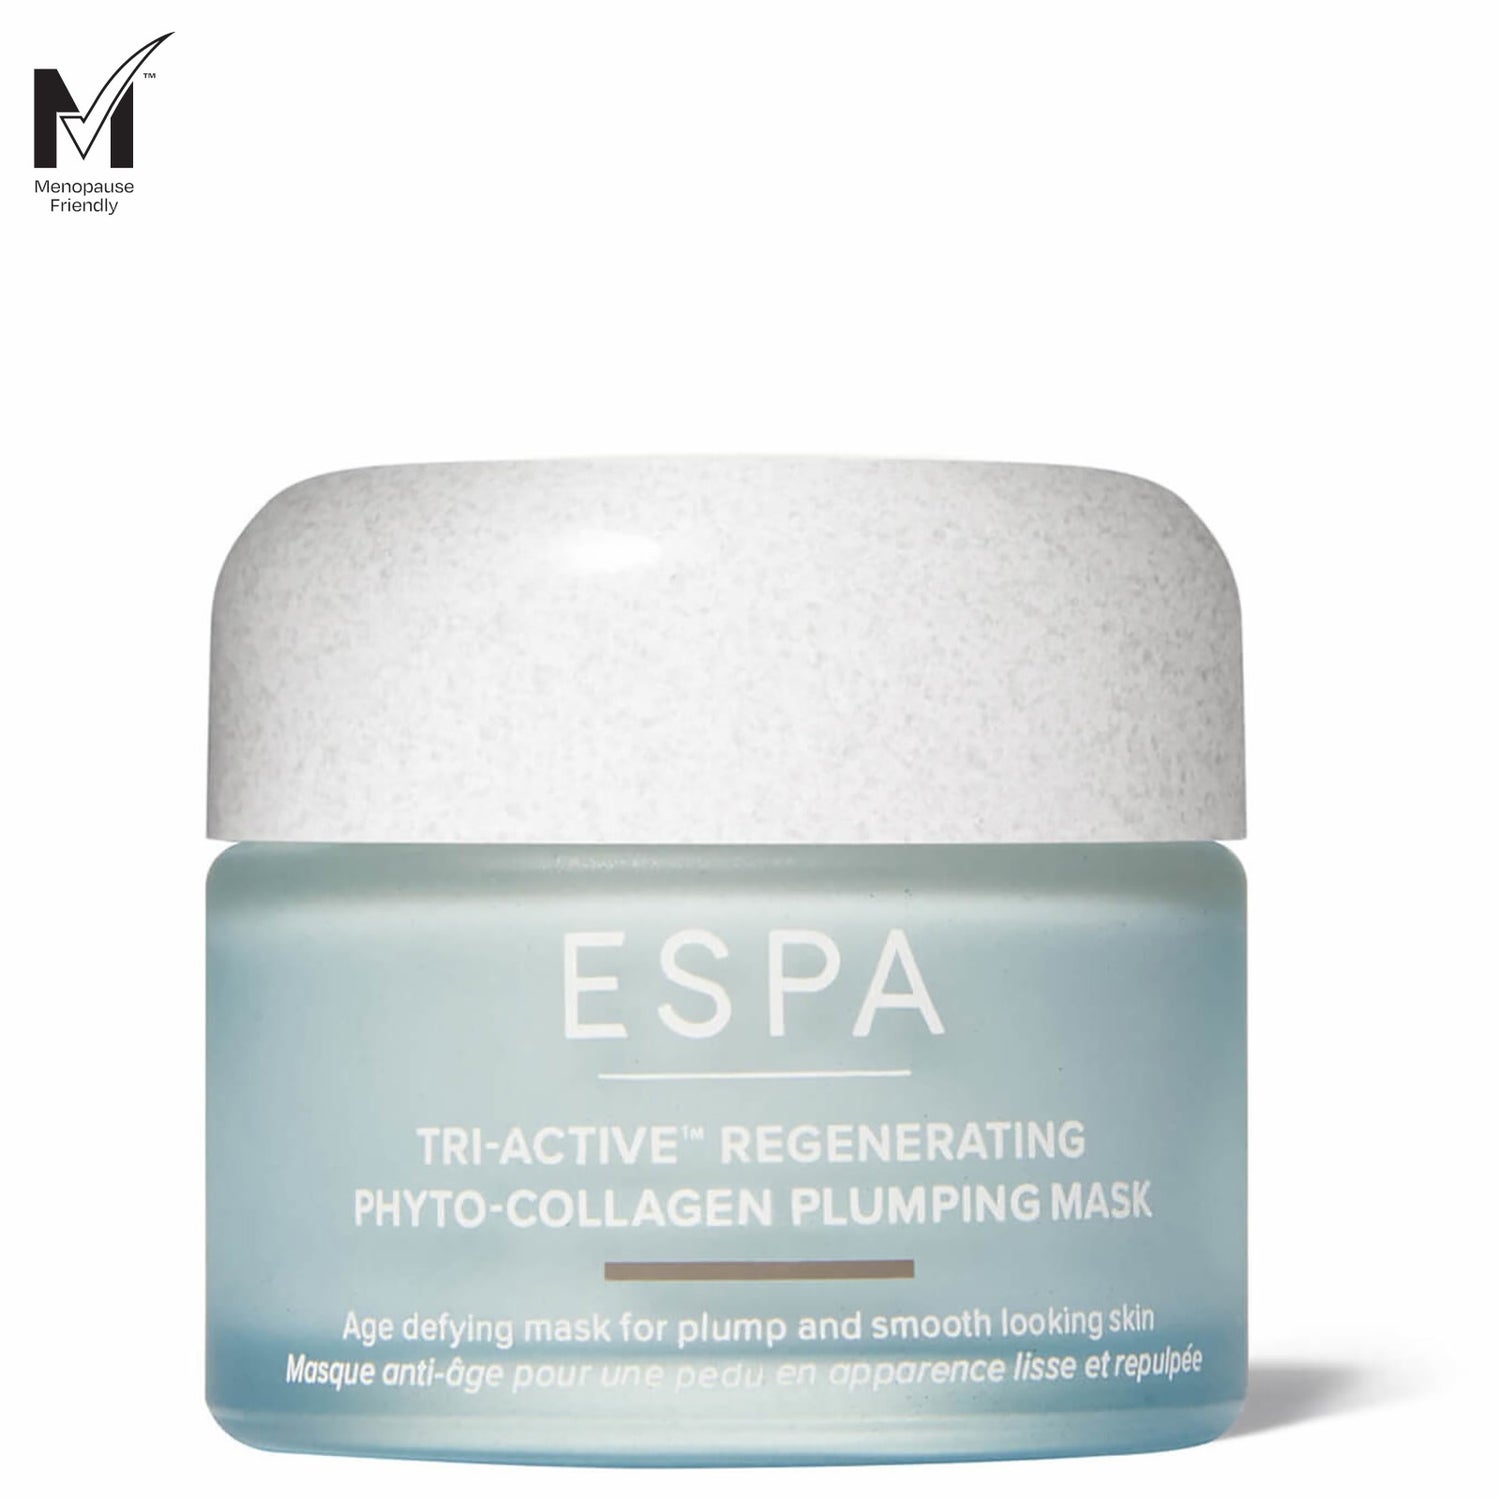 ESPA Phyto Collagen Plumping Mask 55ml